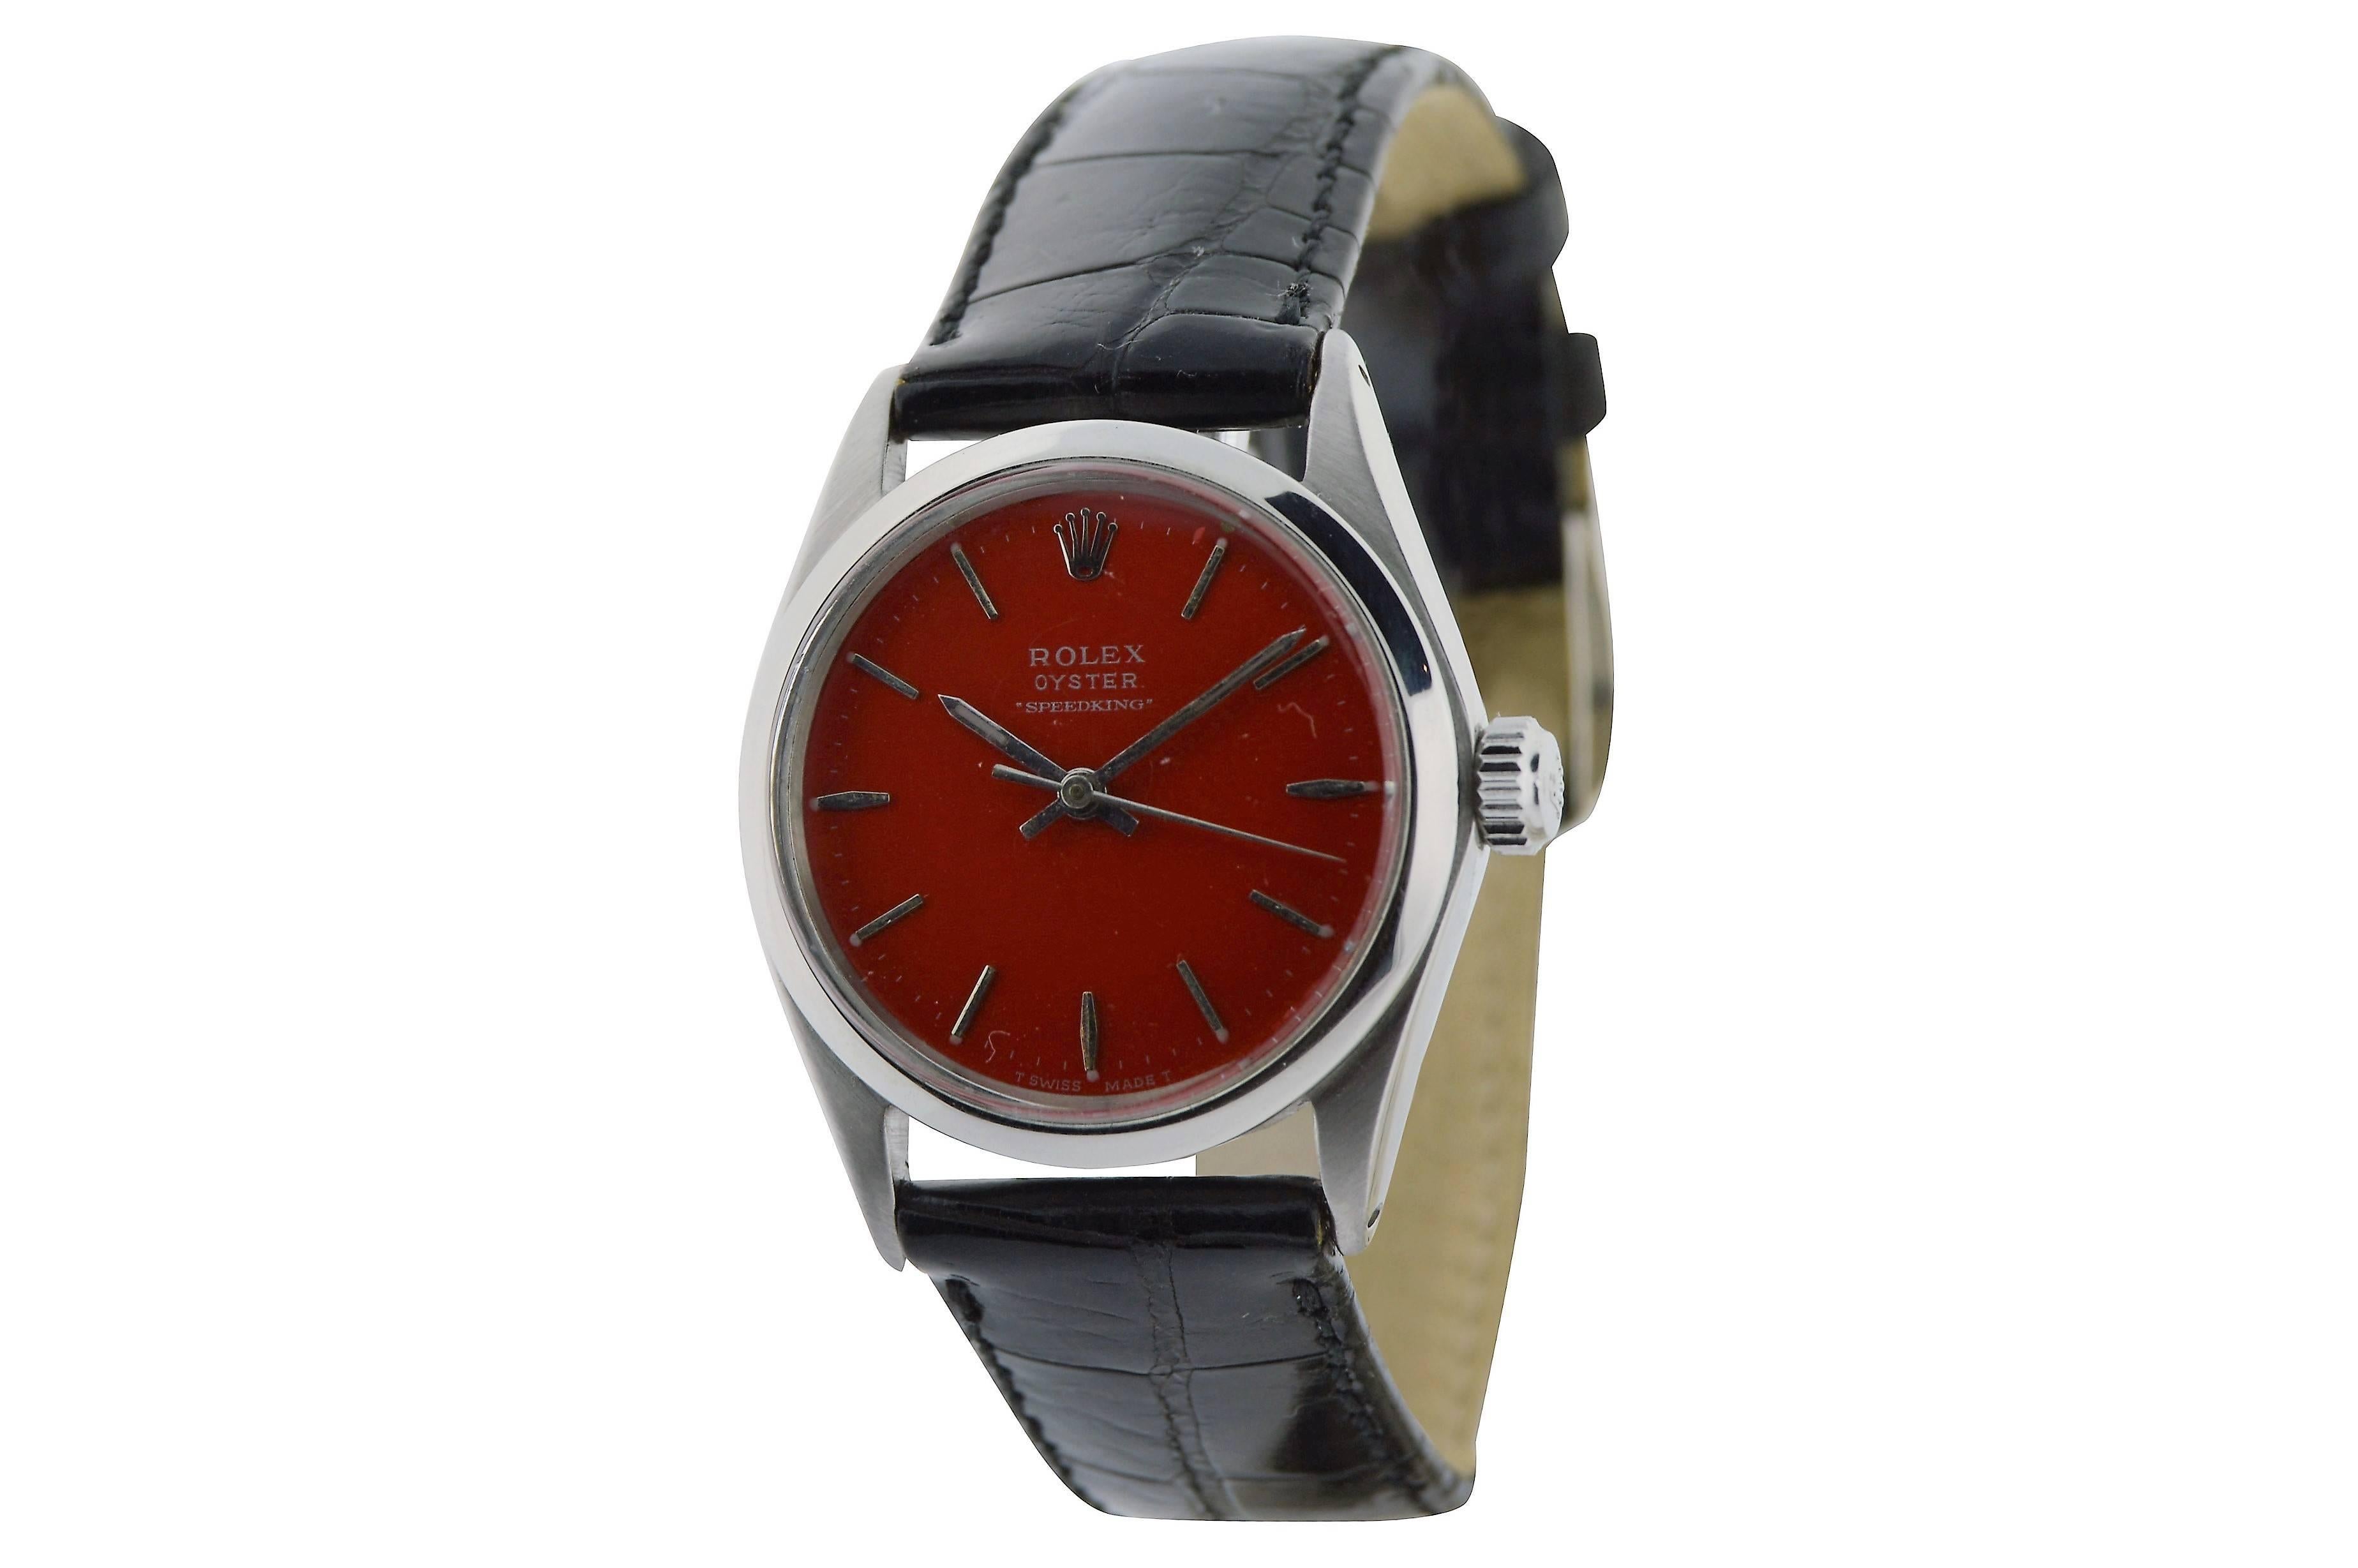 FACTORY / HOUSE: Rolex Watch Company 
STYLE / REFERENCE: Speedking / Oyster
METAL / MATERIAL: Stainless Steel 
DIMENSIONS:  35mm  X  30mm
CIRCA: 1950's
MOVEMENT / CALIBER: 17 Jewels / 10.5 
DIAL / HANDS: Red, Baton Markers / Baton Hands
ATTACHMENT /